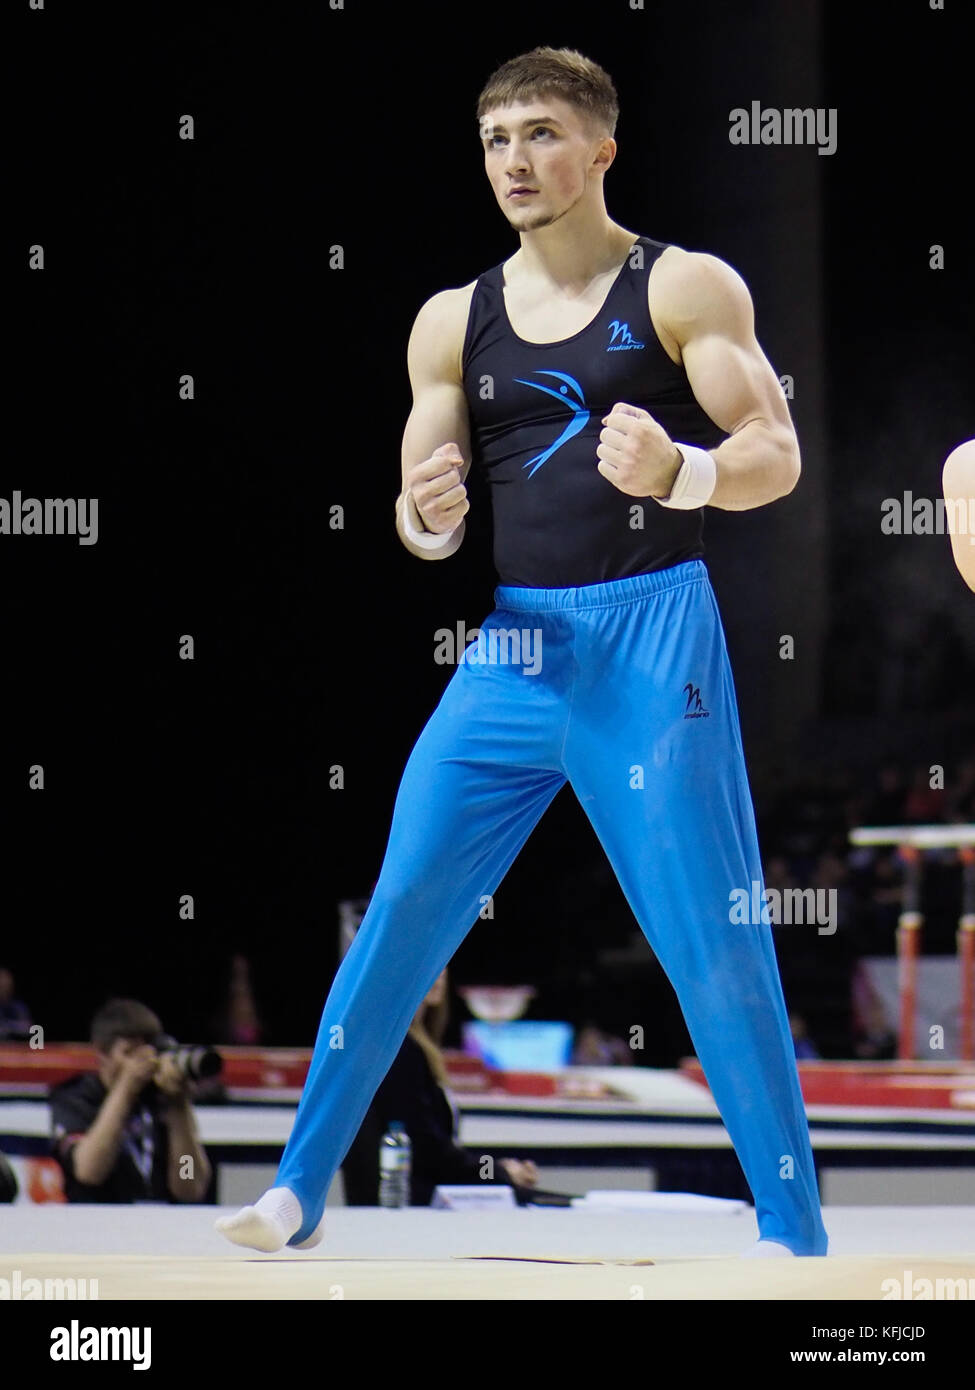 Sam Oldham in action at the 2017 British Gymnastics Championships.  In 2010 Sam won the high bar title at the Youth Olympics and also claimed the Junior European all-around title in the same year. At senior level, he took fourth place in the high bar final at the 2011 European Championships. After injury he won high bar gold and all-around silver at the 2012 British Championship before going on to claim Olympic team bronze in London. In 2013 success came at the European Championships in the form of high bar silver. At the 2014 British Championships Sam won high bar and rings bronze, finishing  Stock Photo